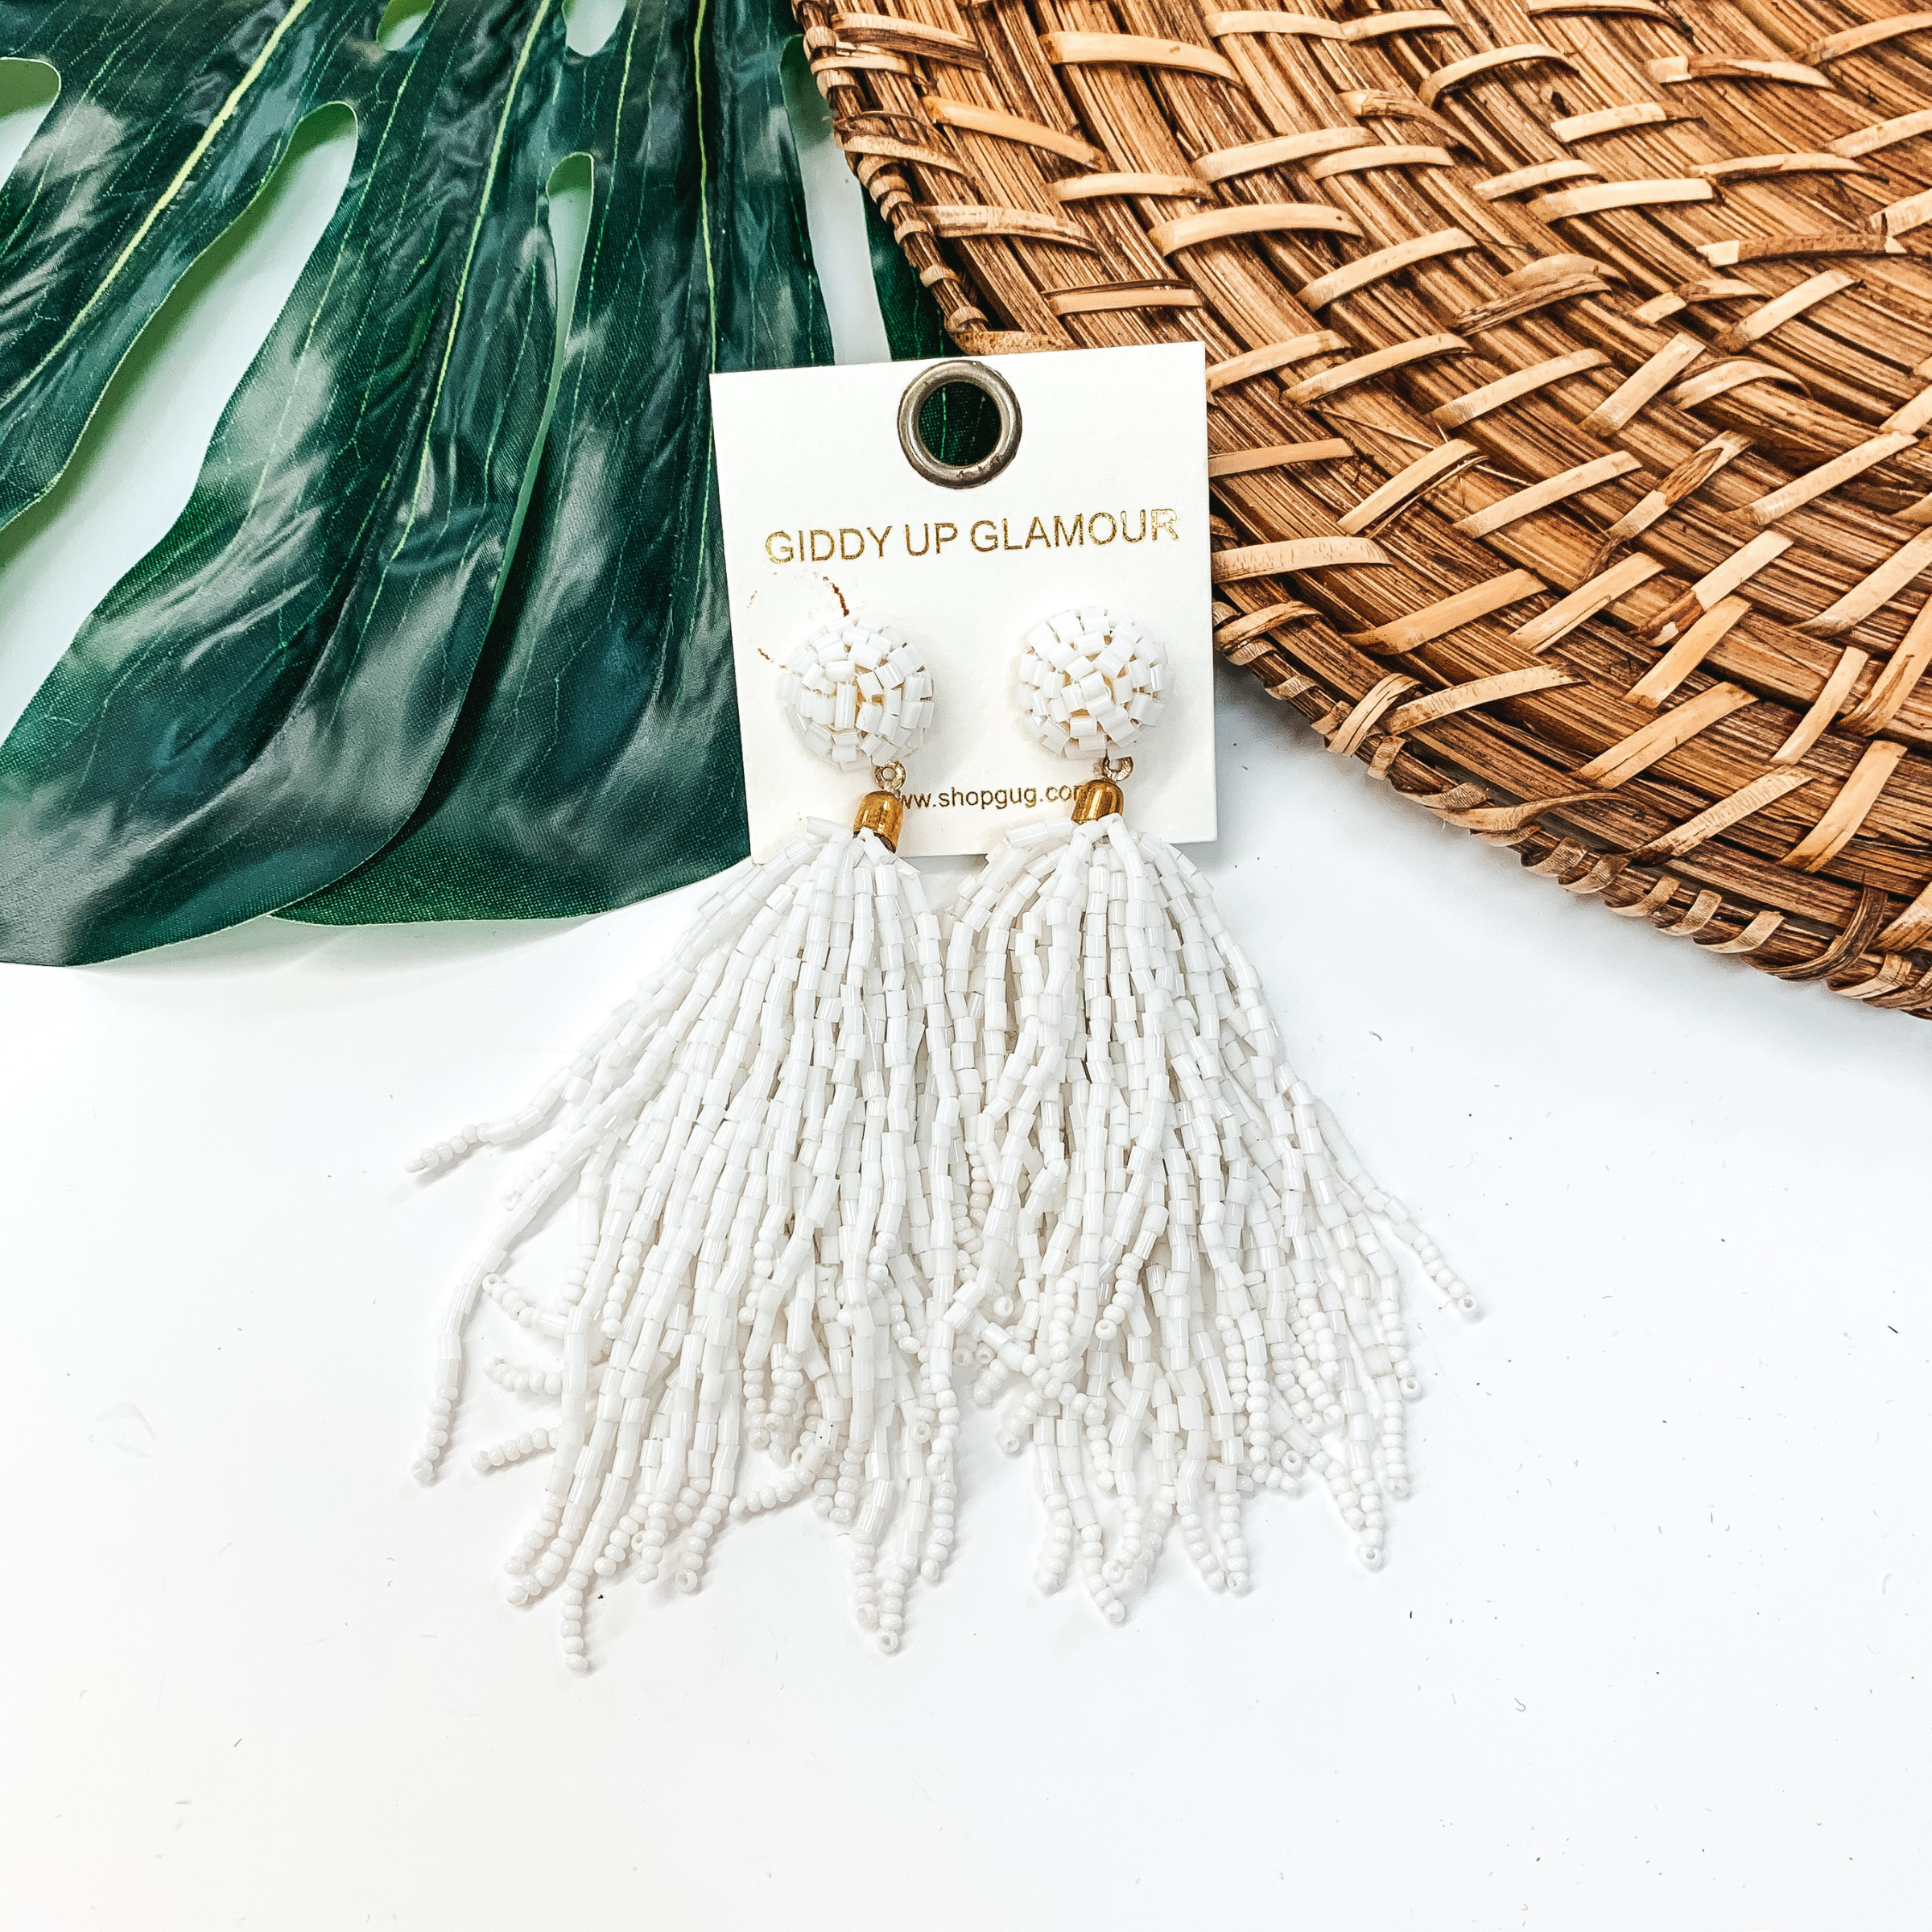 Circle, beaded post back stud earrings with a hanging beaded tassel in white. These earrings are pictured on a white background with a green leaf and tan basket weave in the background.